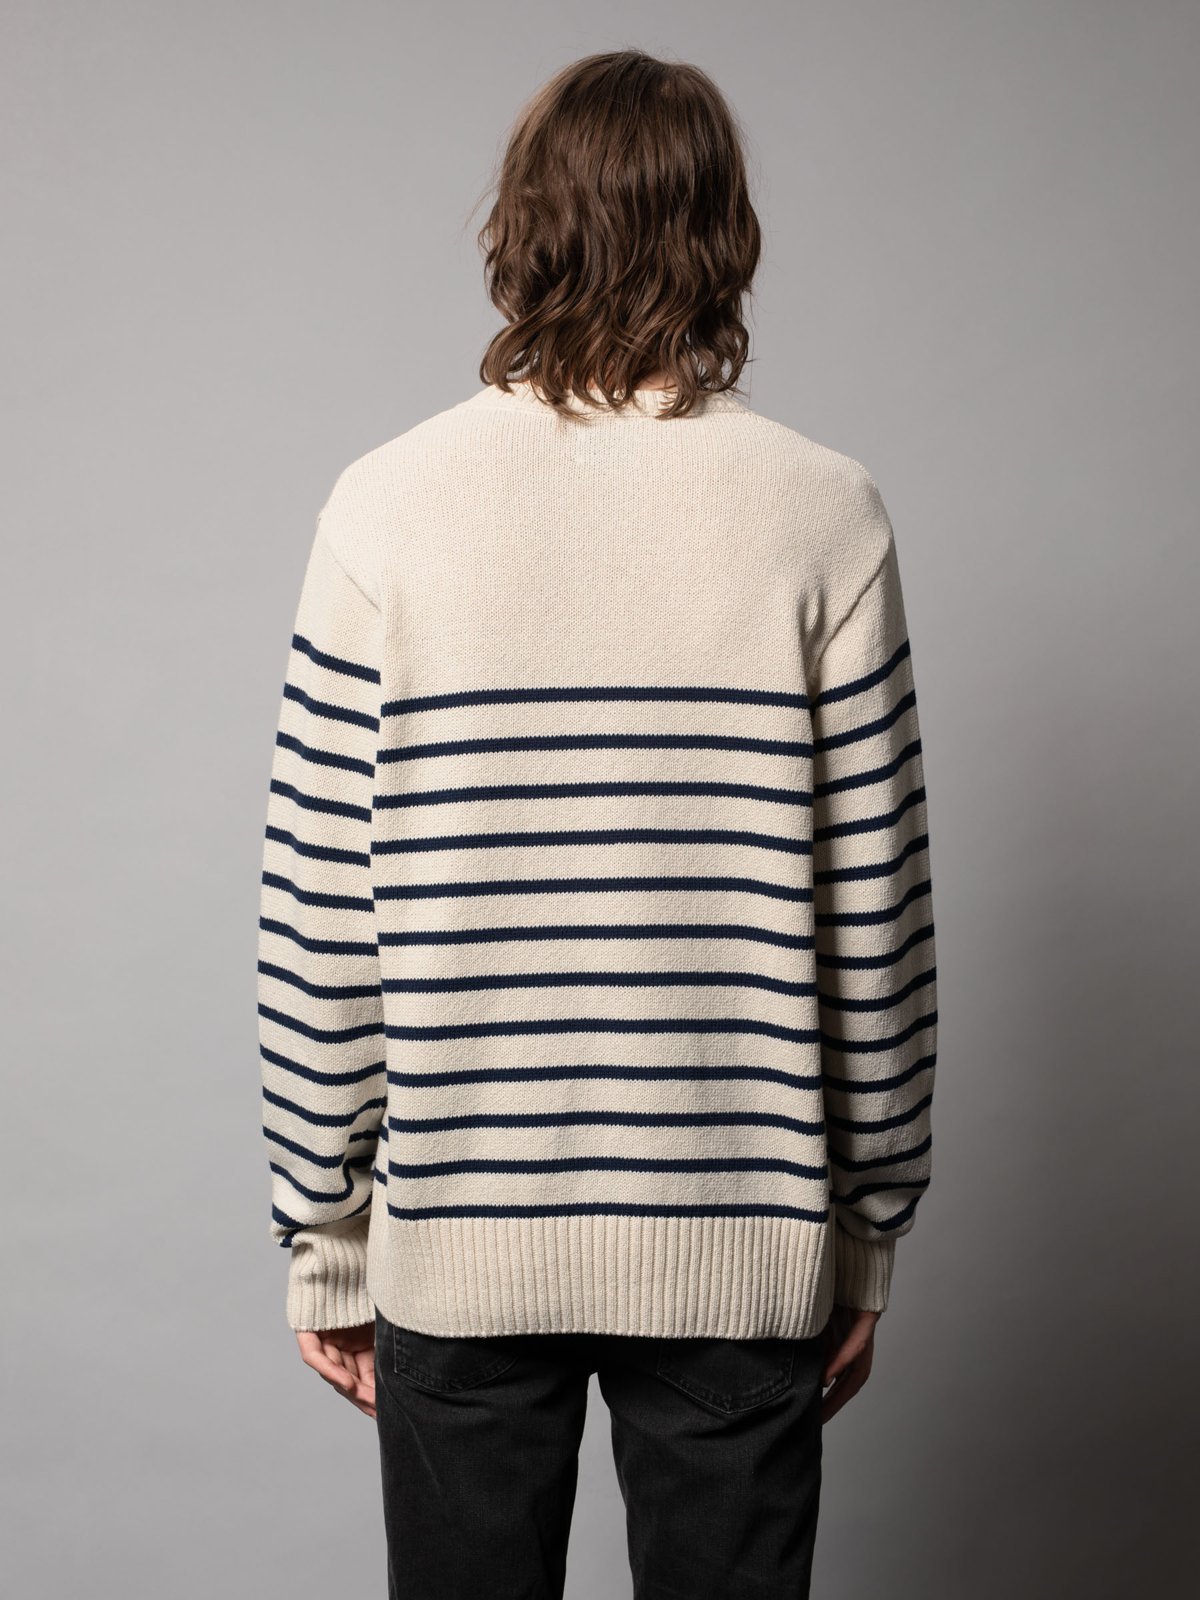 Nudie - Hampus Recycled Sweater - Offwhite/Navy Stripe